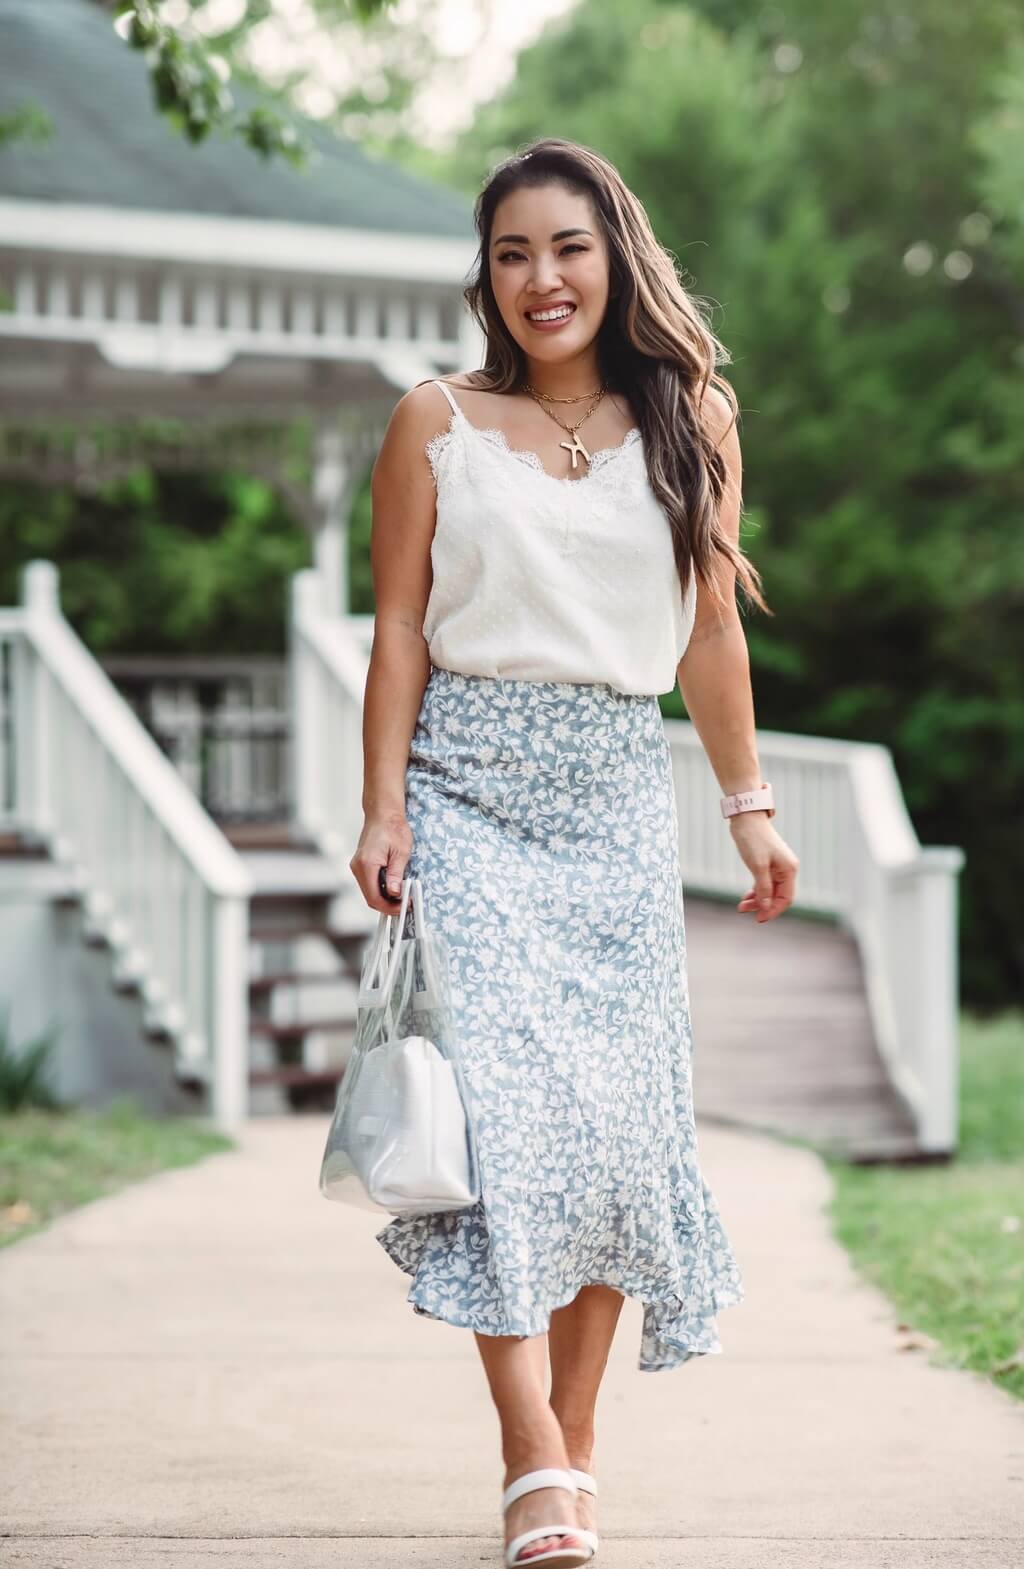 The Best Way to Wear a Midi Skirt for Your Body Type